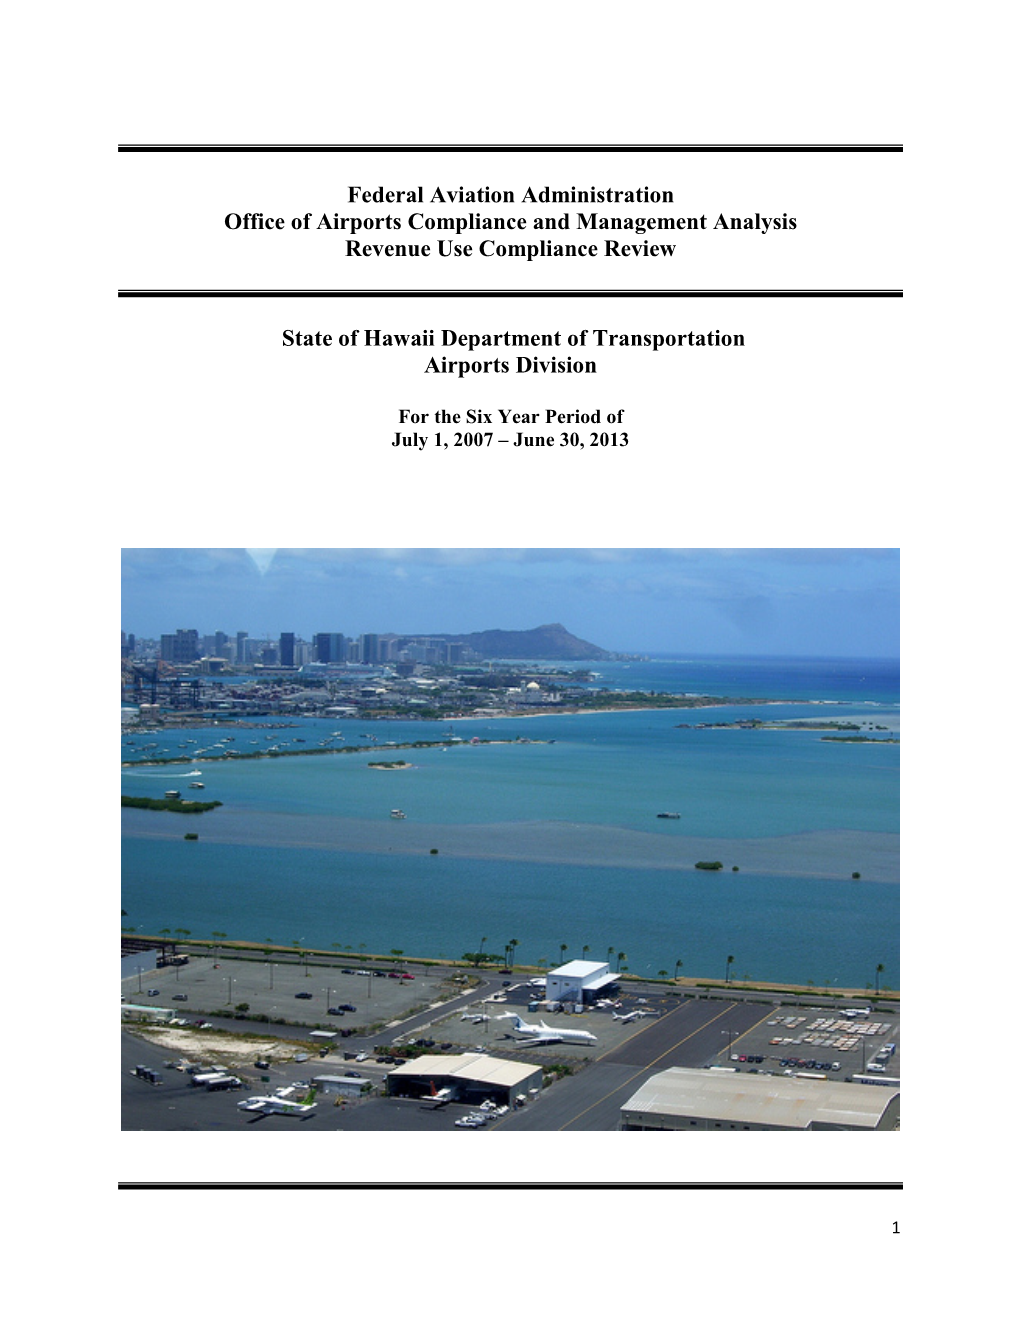 State of Hawaii Department of Transportation, Airports Division